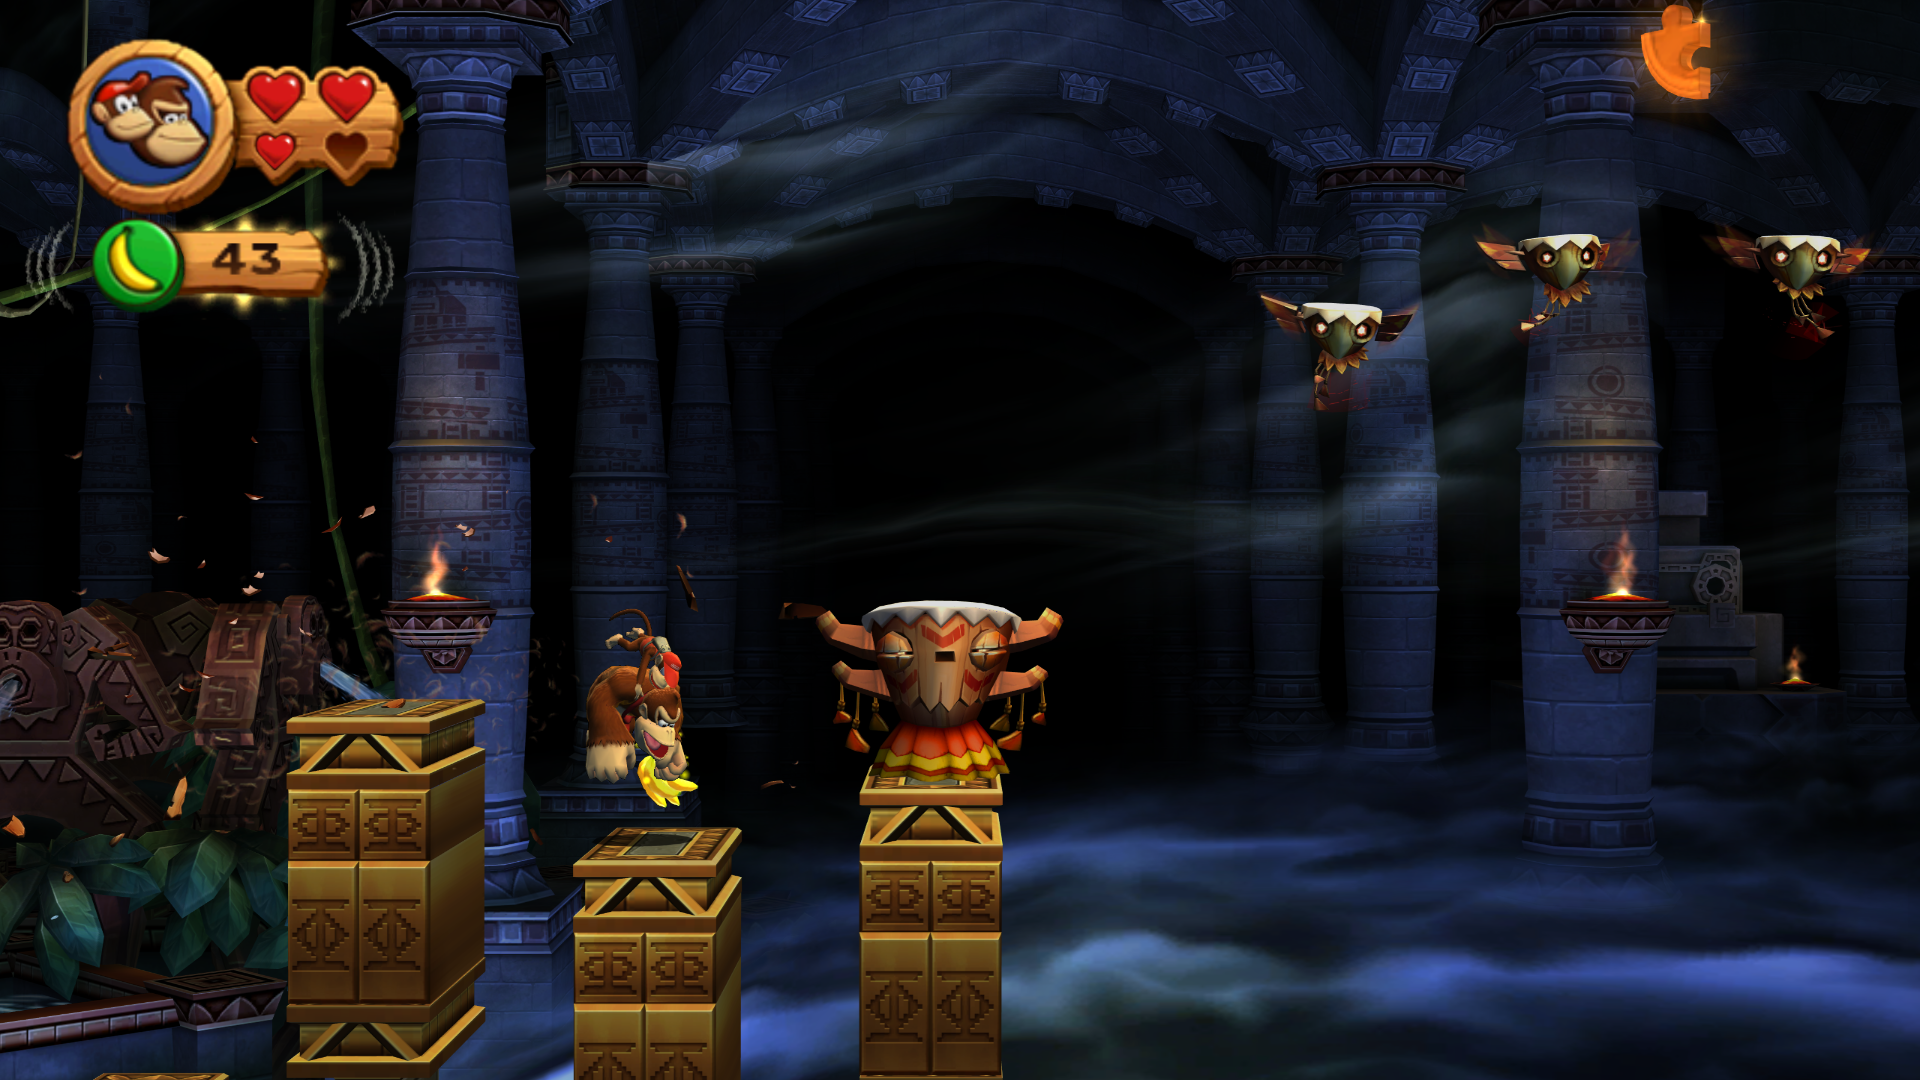 Video Game Donkey Kong Country Returns 1920x1080